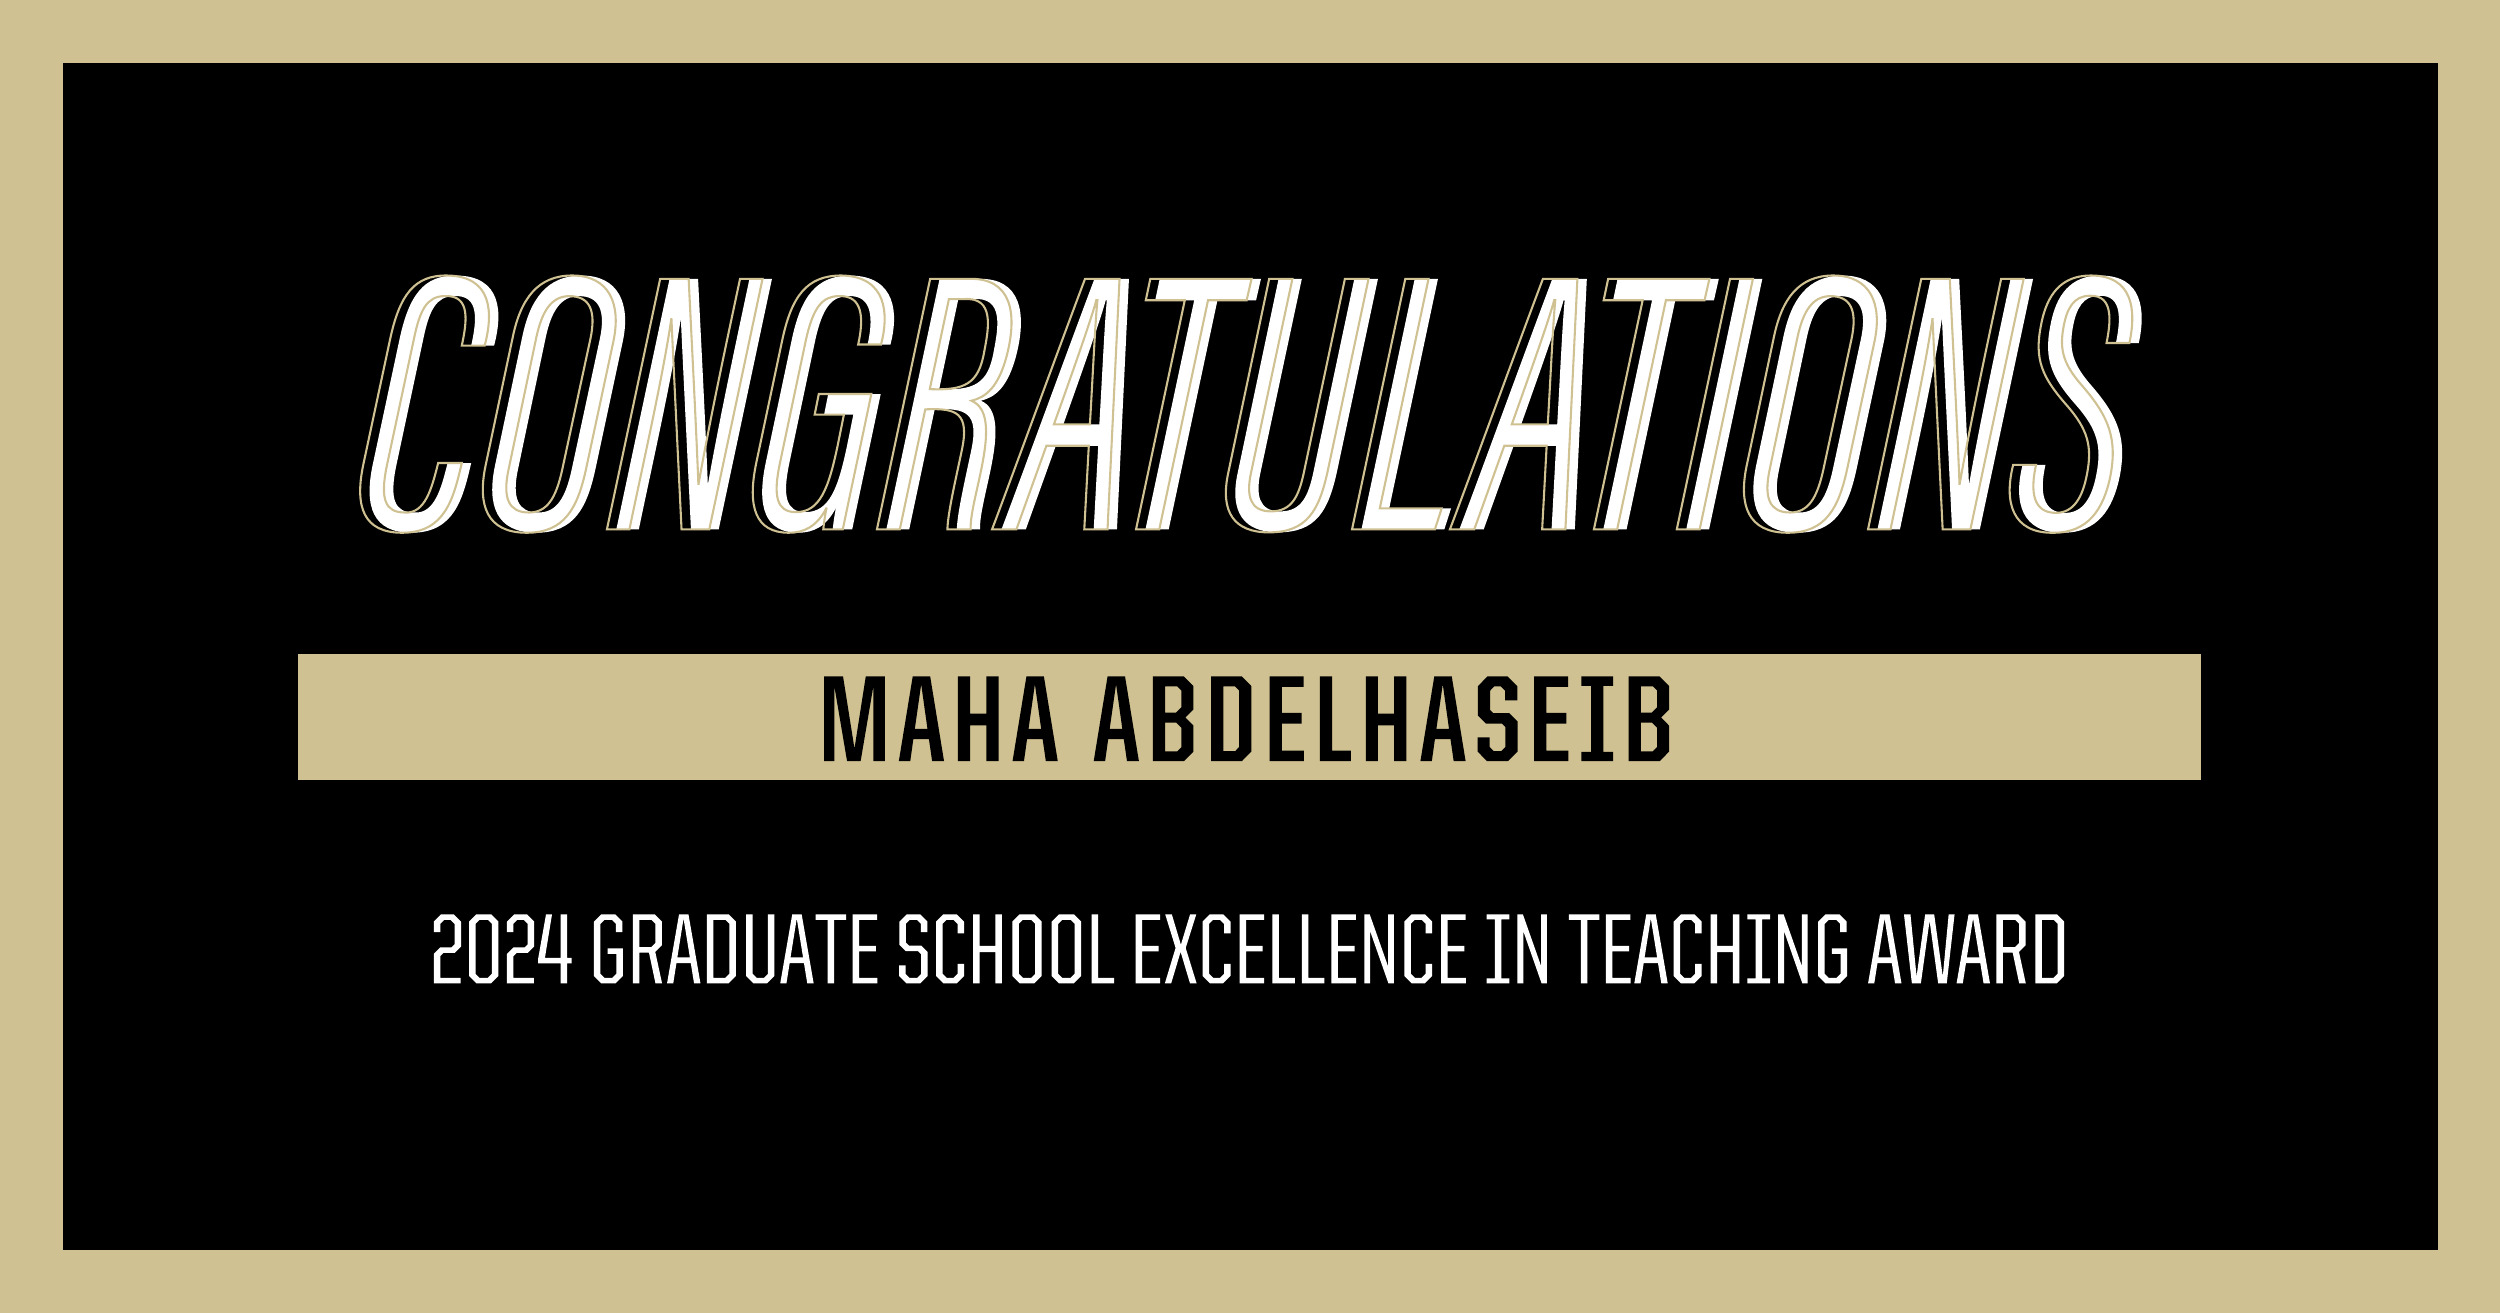 A picture of a graphic that says "Congratulations, Maha Abdelhaseib" and the name of the award